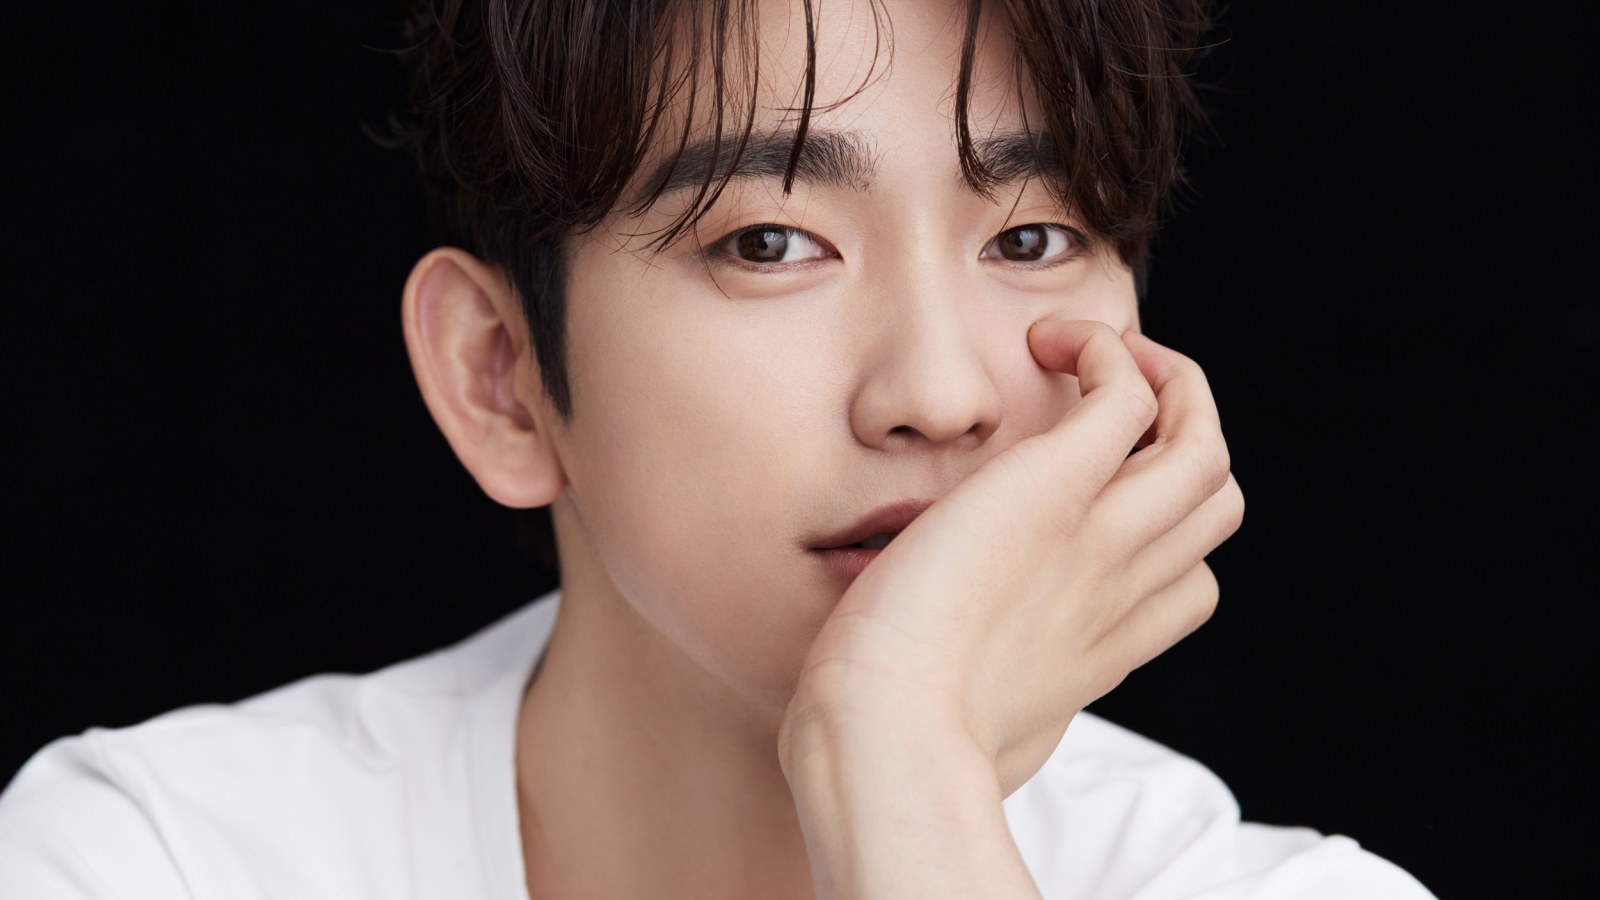 Got7 S Jinyoung On His New Single The Devil Judge Spoilers And Artist He D Most Love To Collaborate With